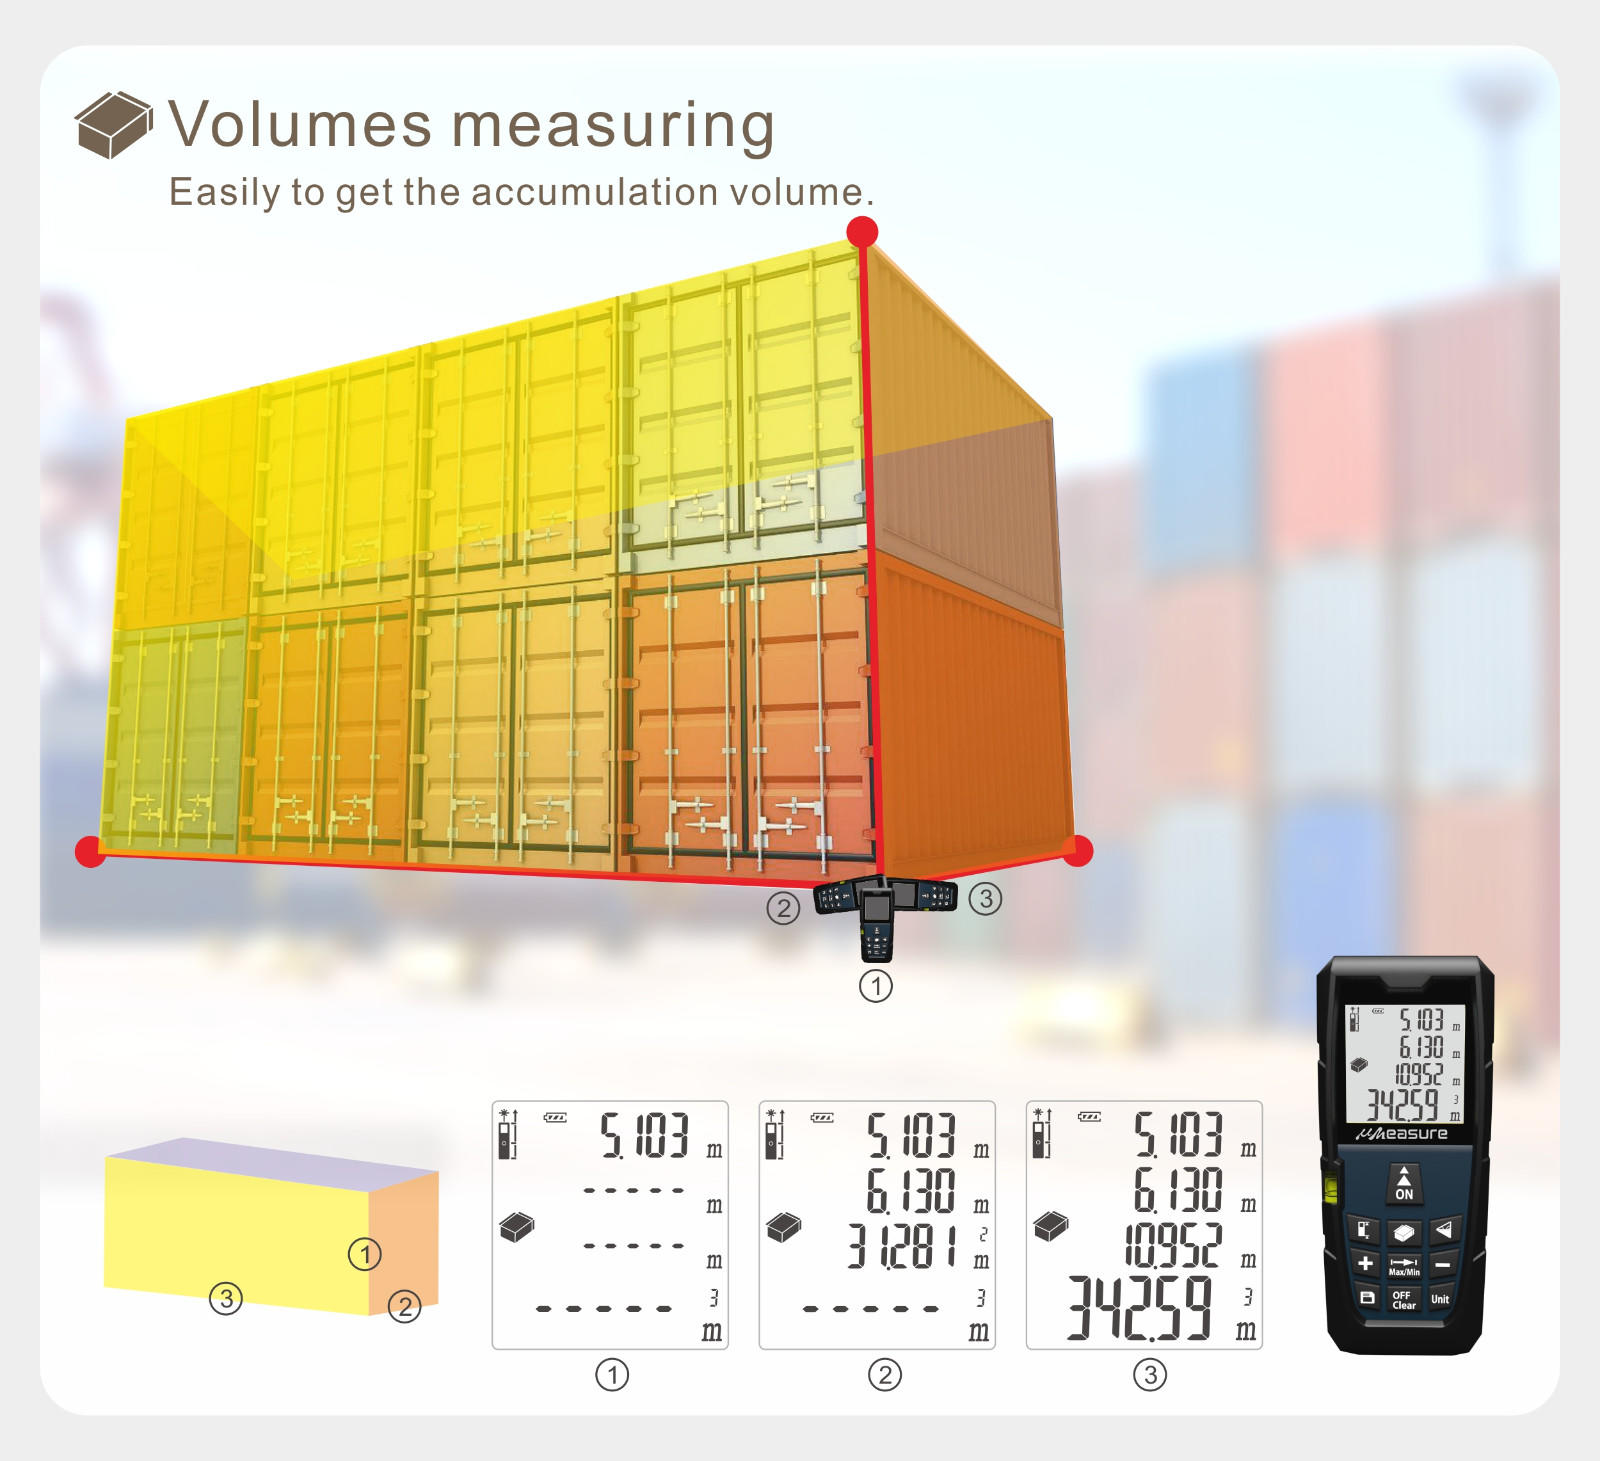 UMeasure accuracy laser measure tape handhold for measuring